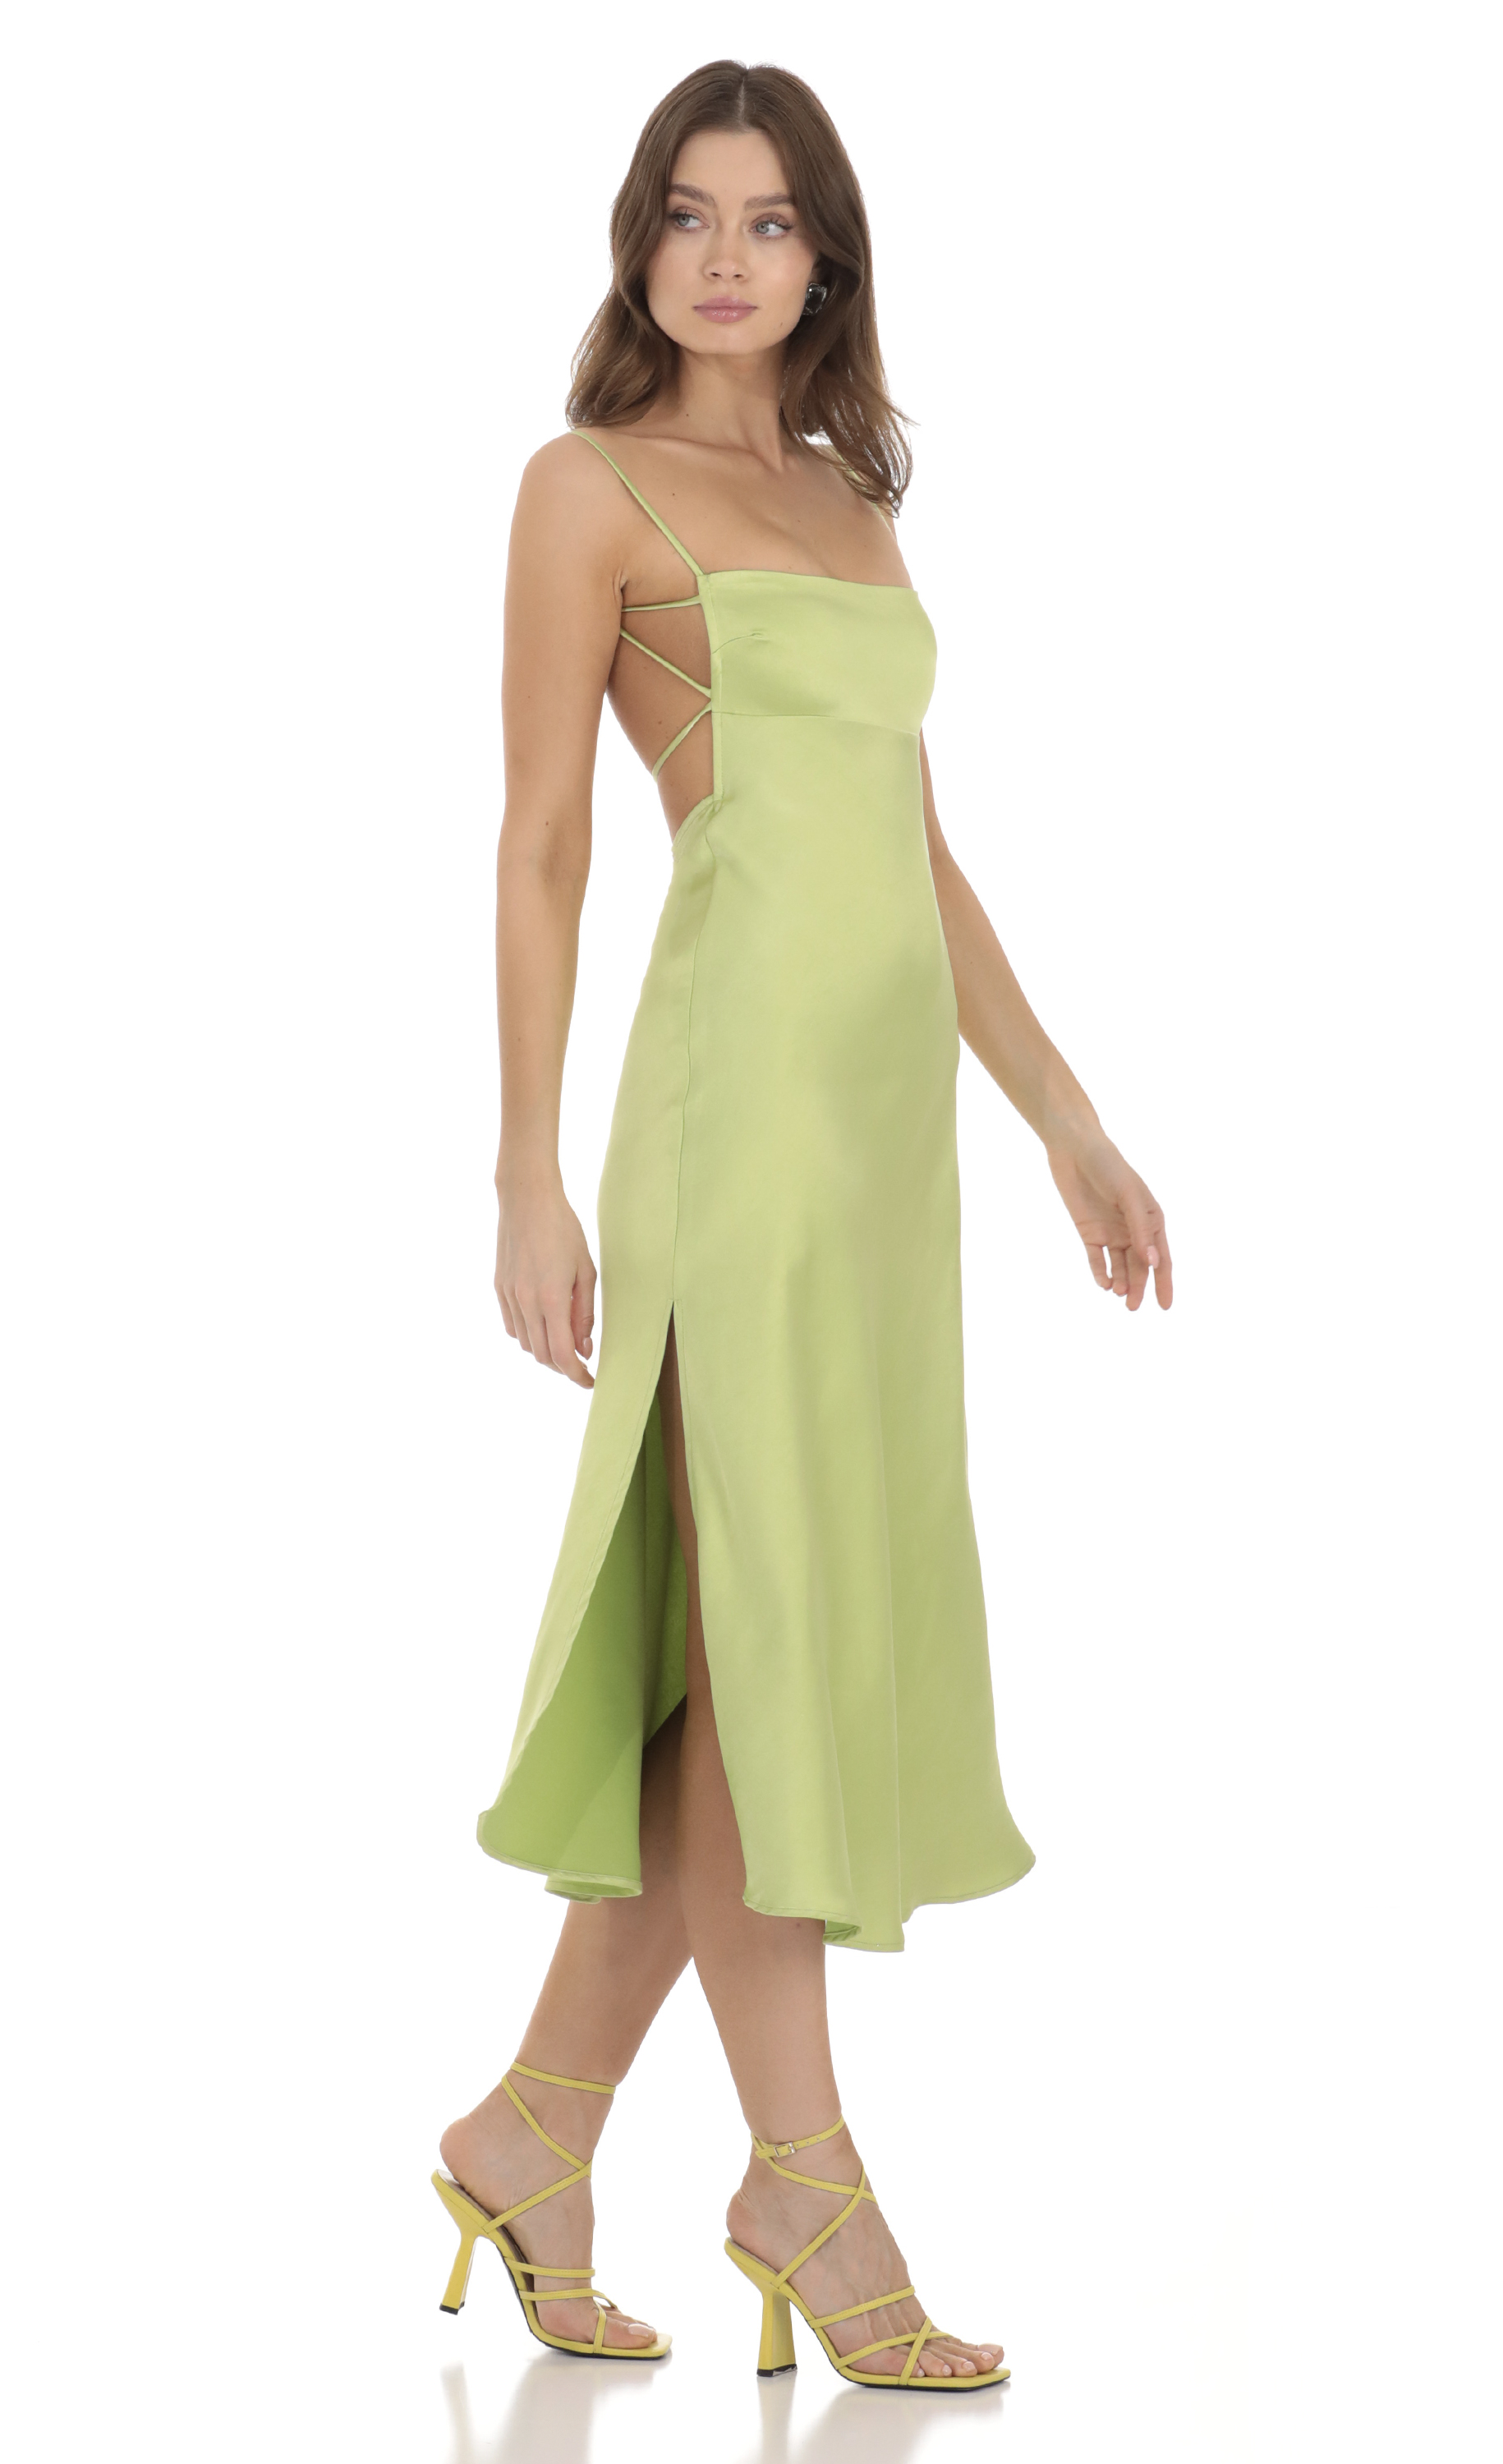 Satin Open Back Dress in Lime Green